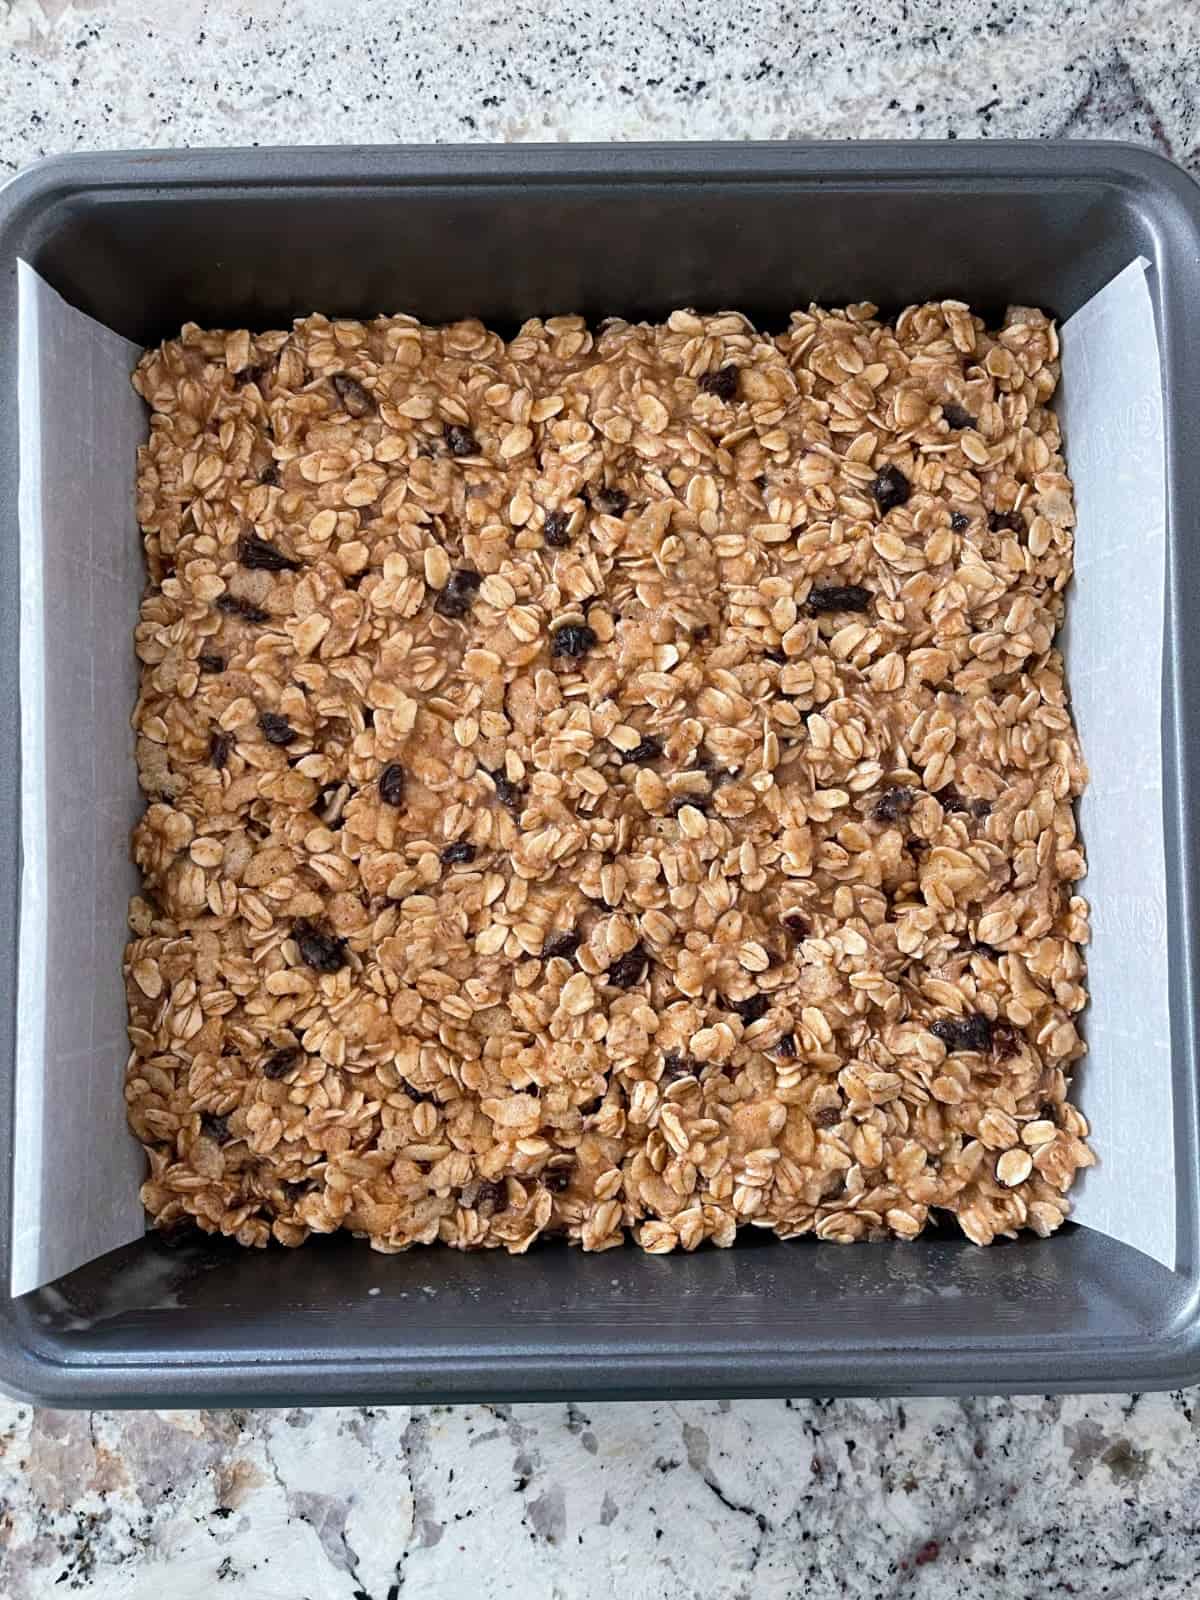 Unbaked oatmeal spice bars in parchment paper lined baking pan.